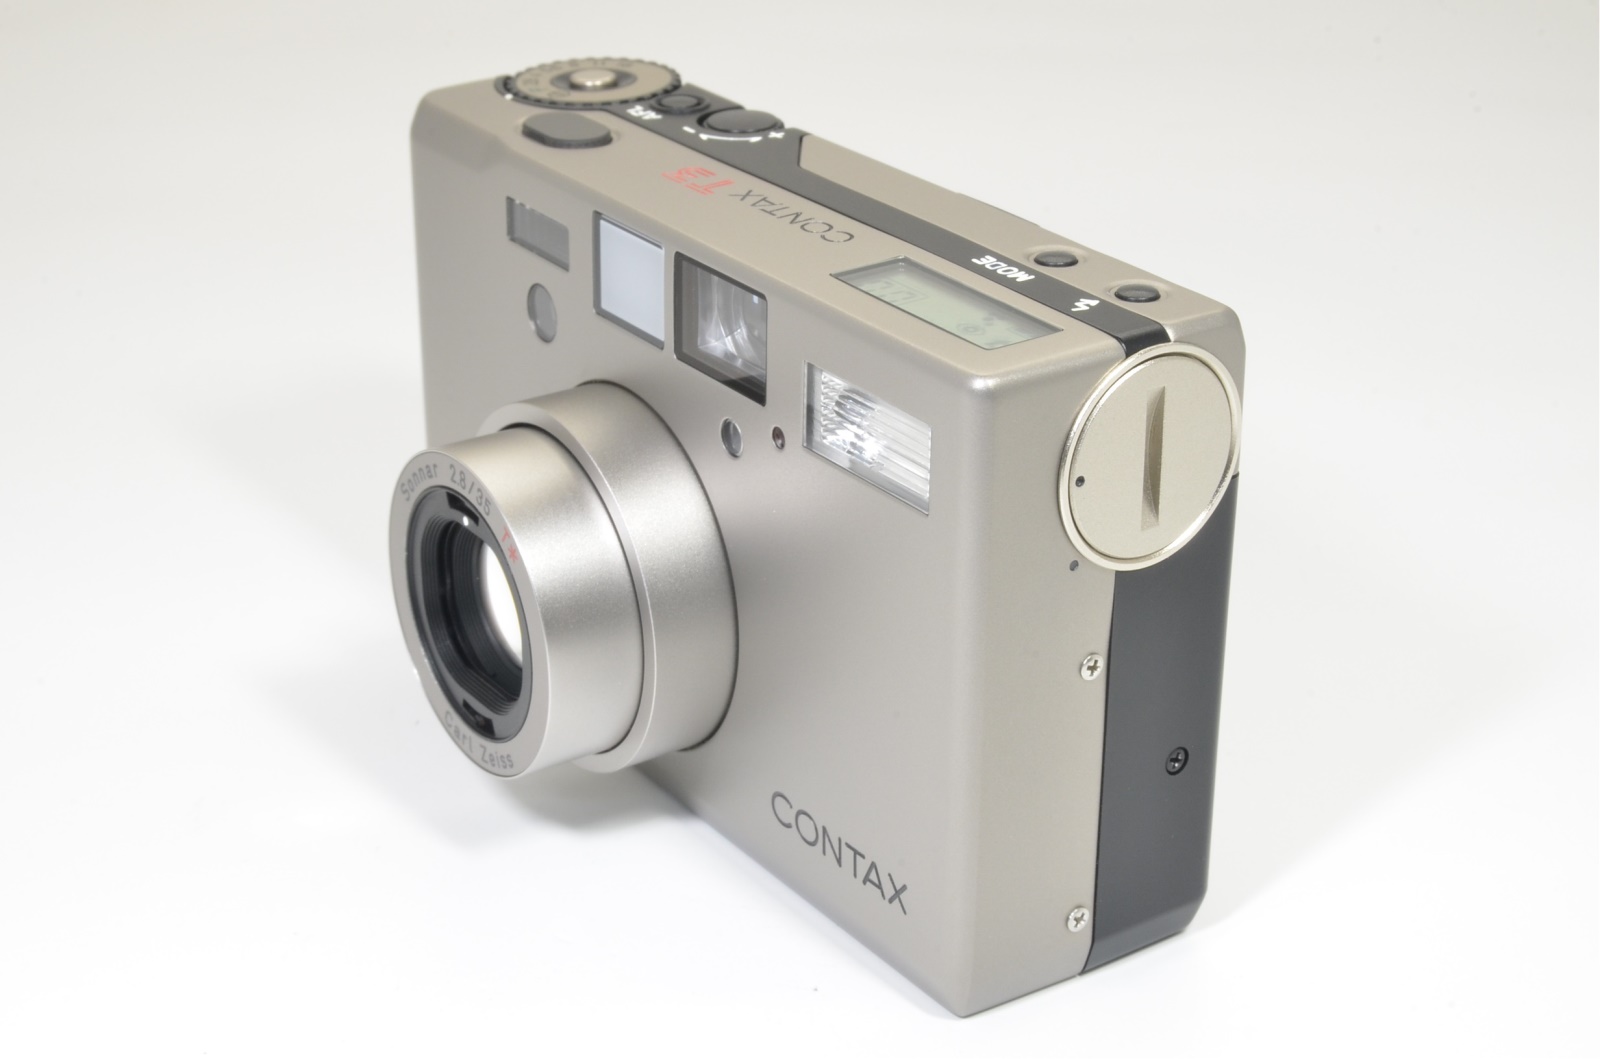 contax t3 titanium silver data back double teeth shooting tested